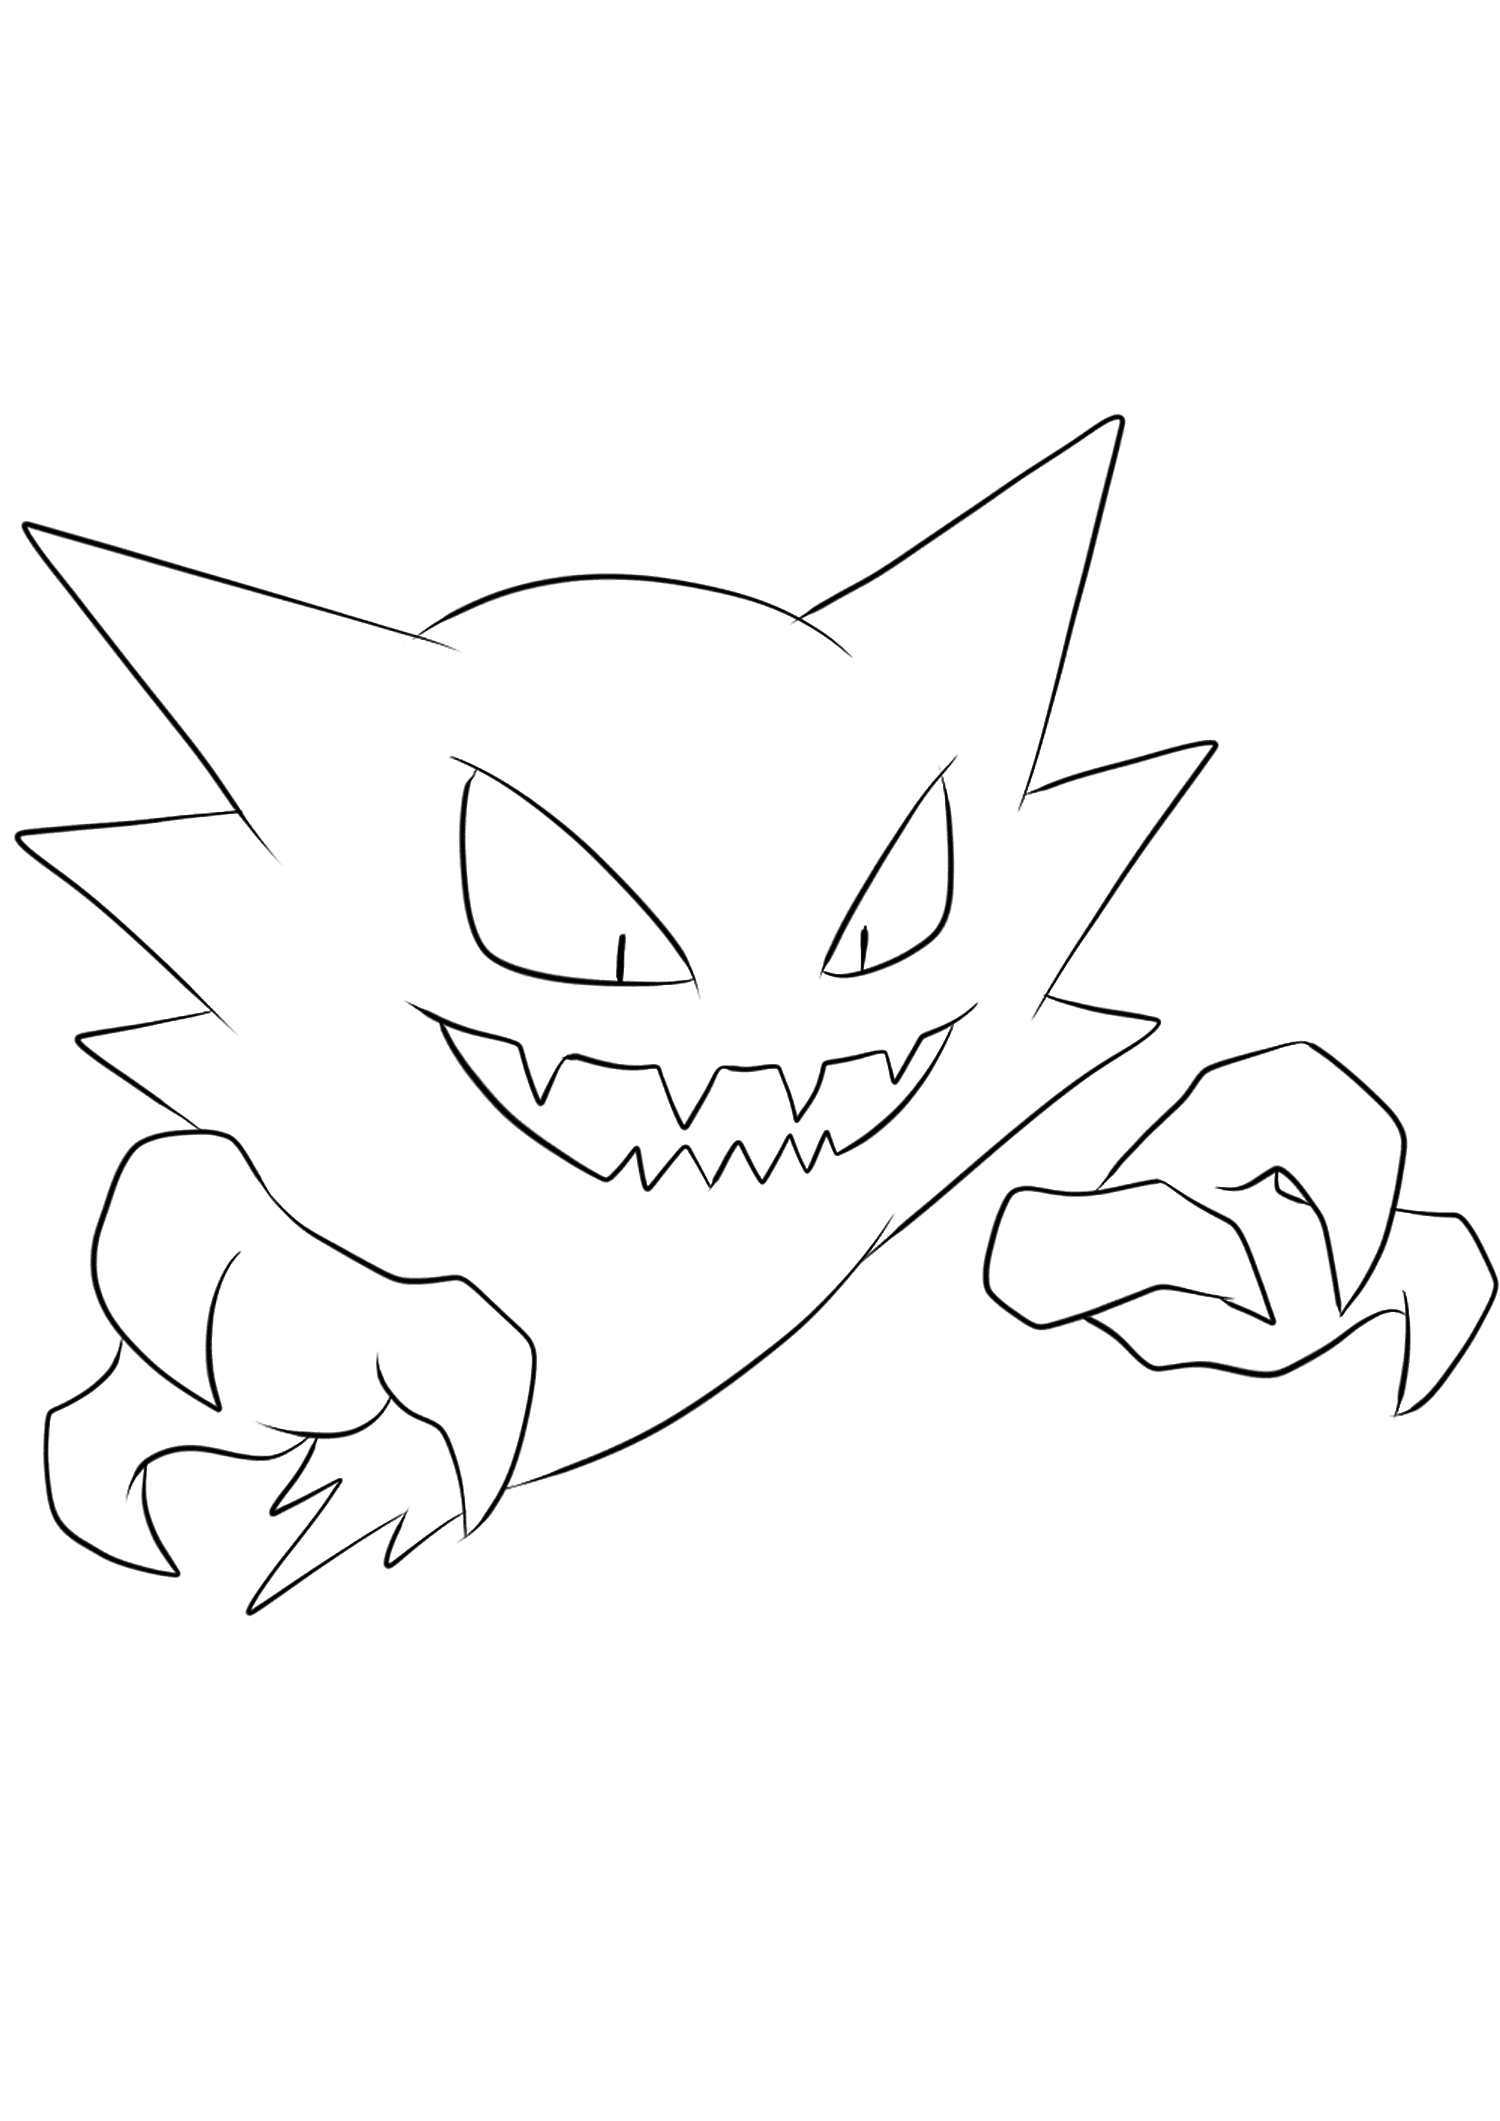 Haunter (No.93). Haunter Coloring page, Generation I Pokemon of type Ghost and PoisonOriginal image credit: Pokemon linearts by Lilly Gerbil on Deviantart.Permission:  All rights reserved © Pokemon company and Ken Sugimori.